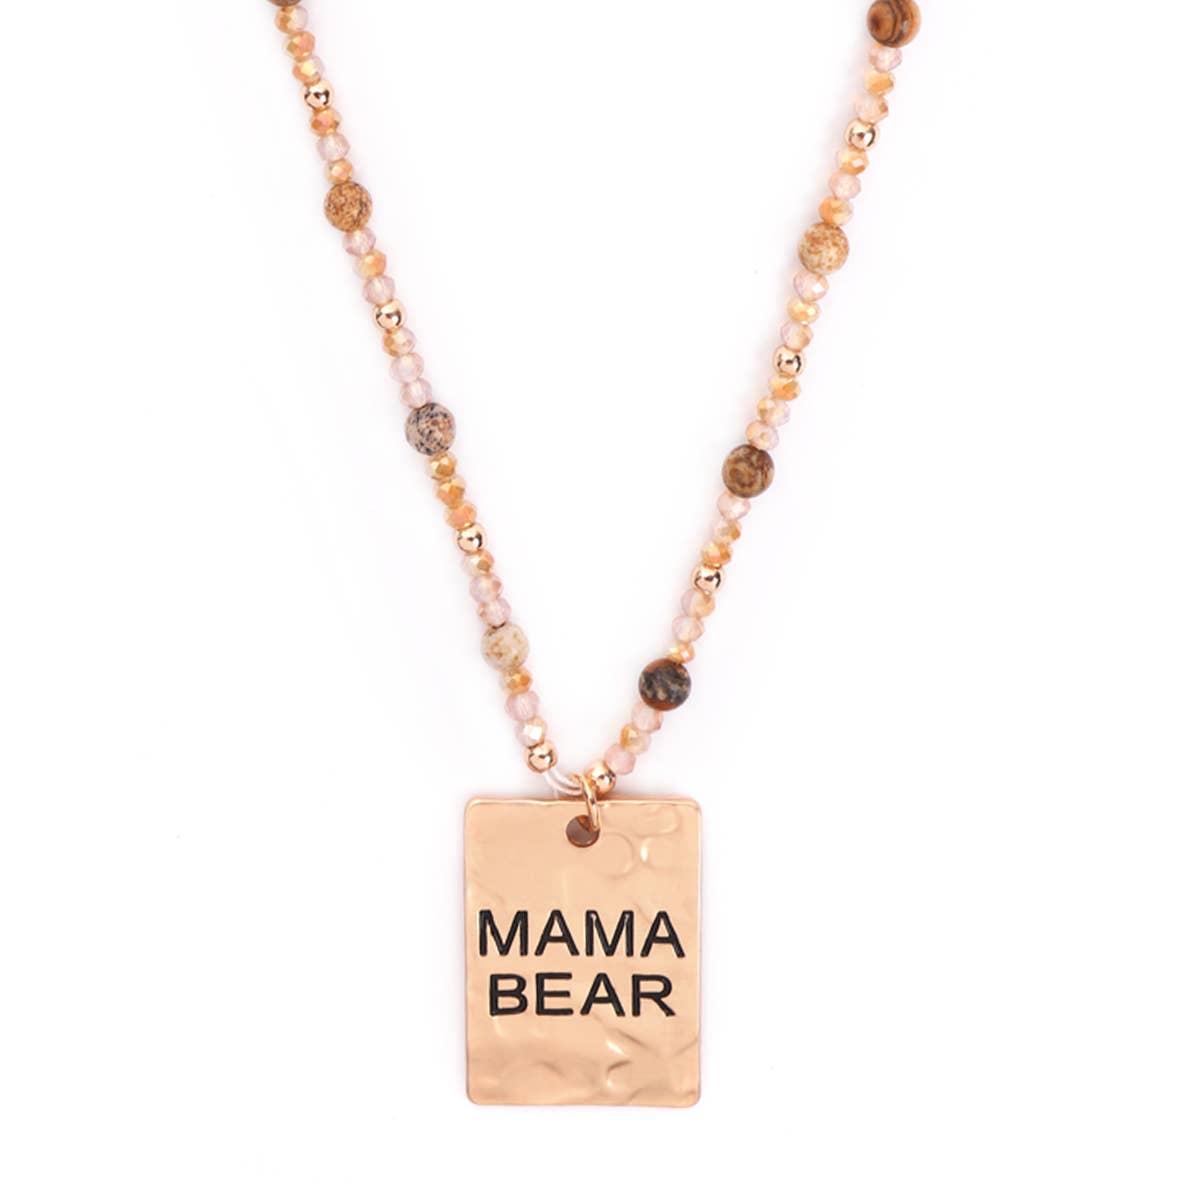 Hammered Square "Mama Bear" Pendant Necklace